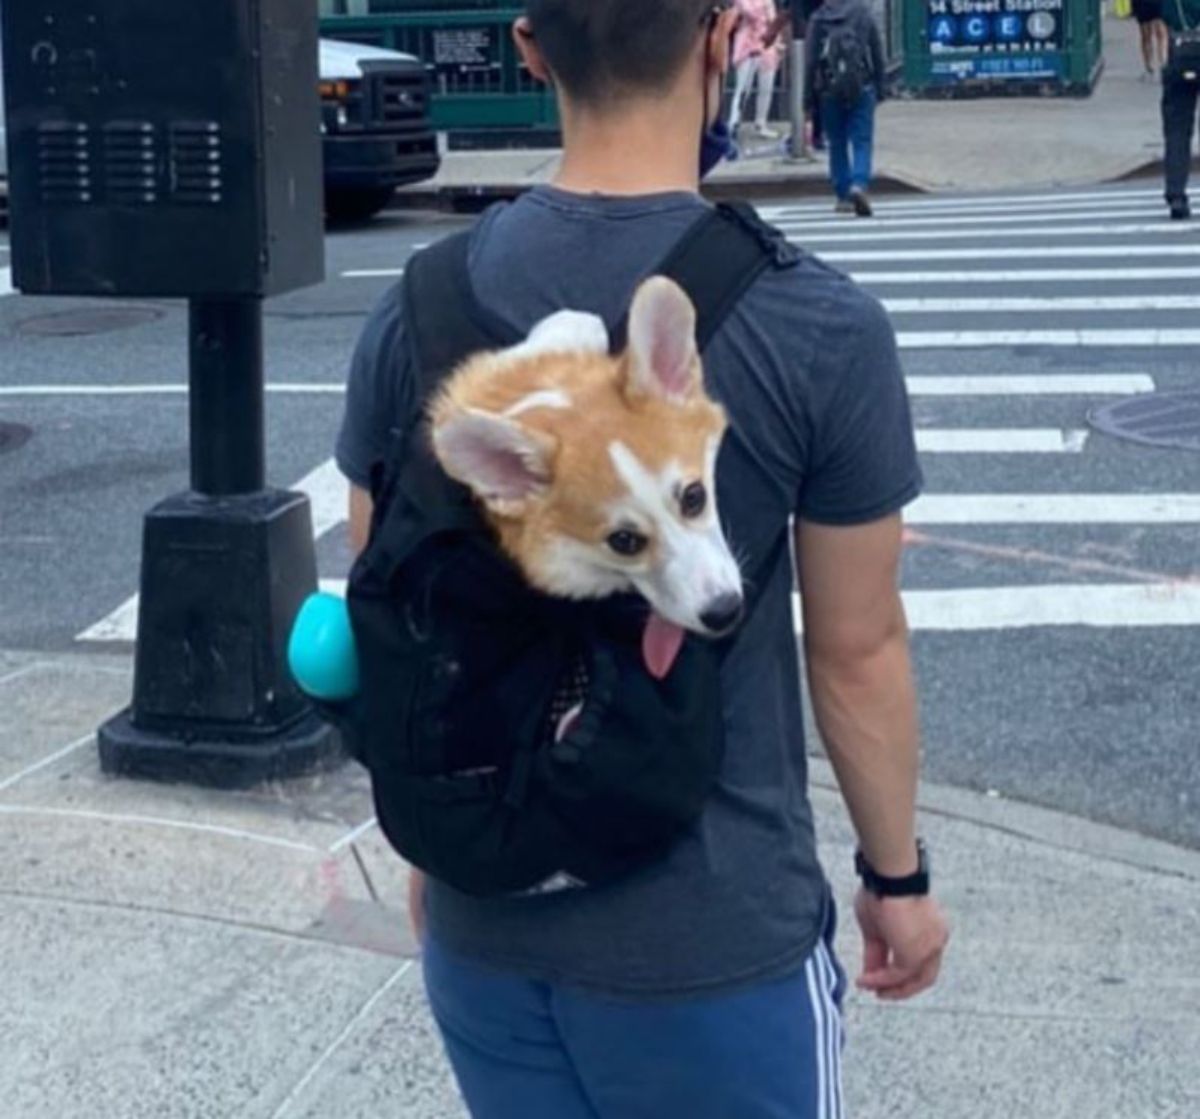 brown and white corgi in a black backpack with its head sticking out with the backpack worn by someone